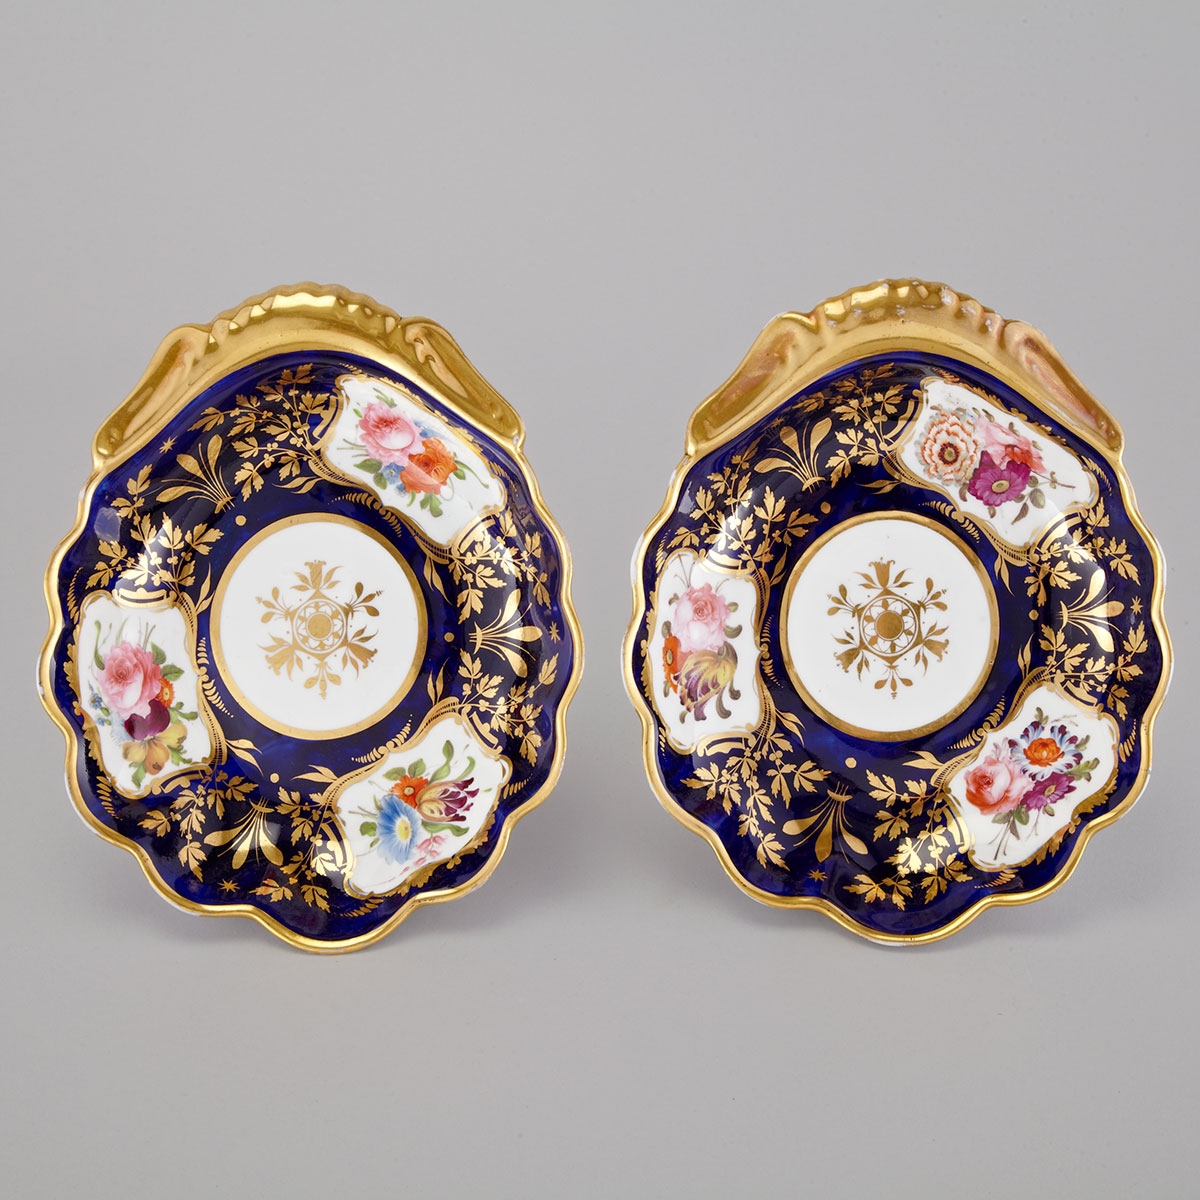 Pair of Davenport Blue-Ground Shell Dishes, c.1820